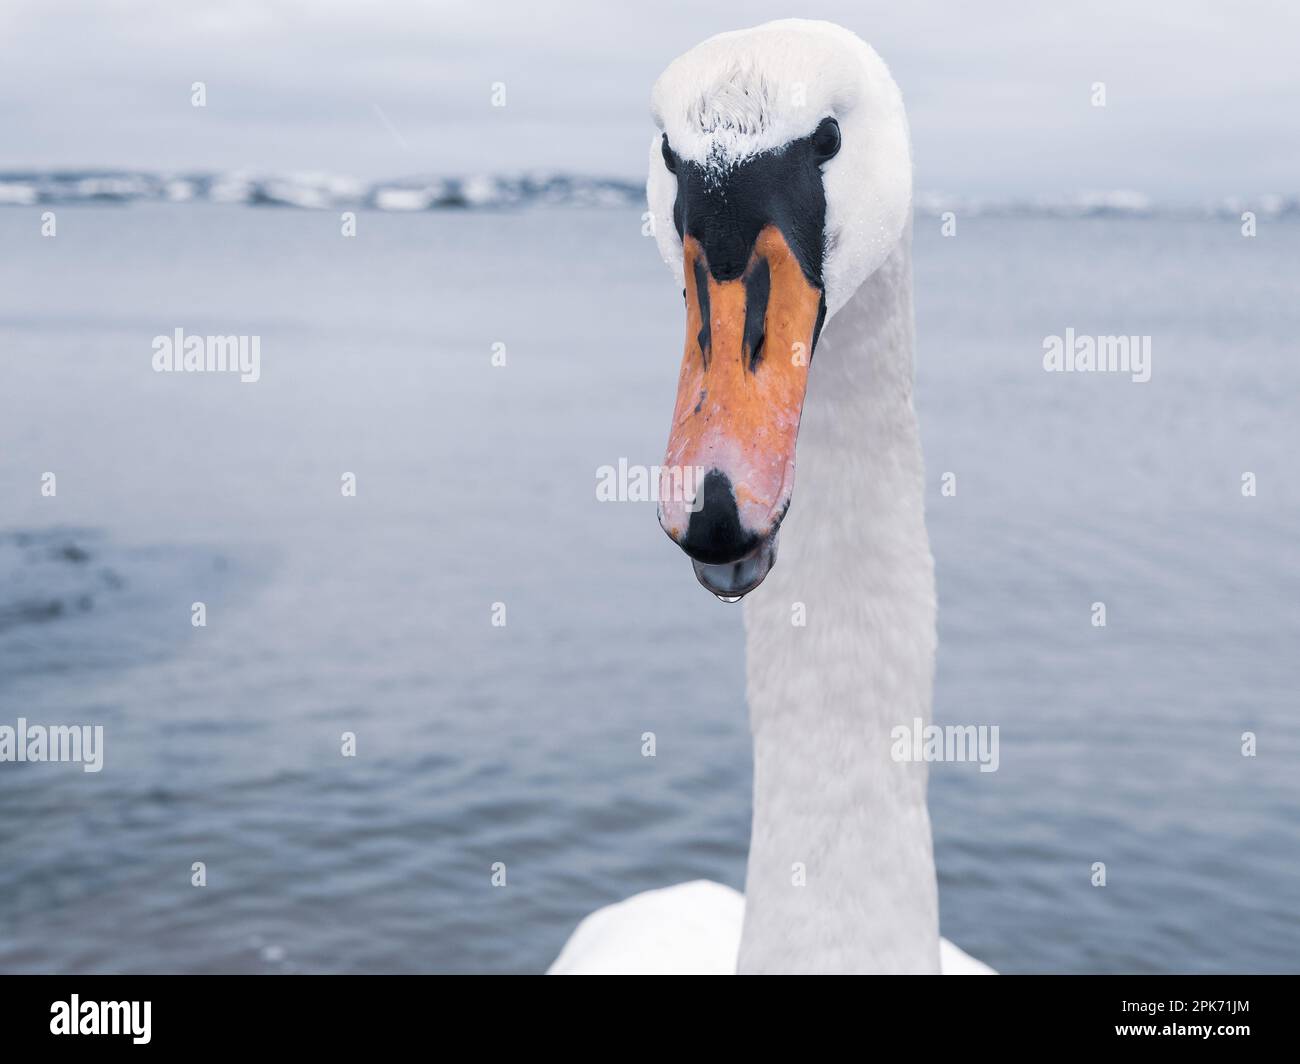 An angry swan stands in the icy waters of Sweden, a proud member of the duck, goose and swan wildlife family. Stock Photo